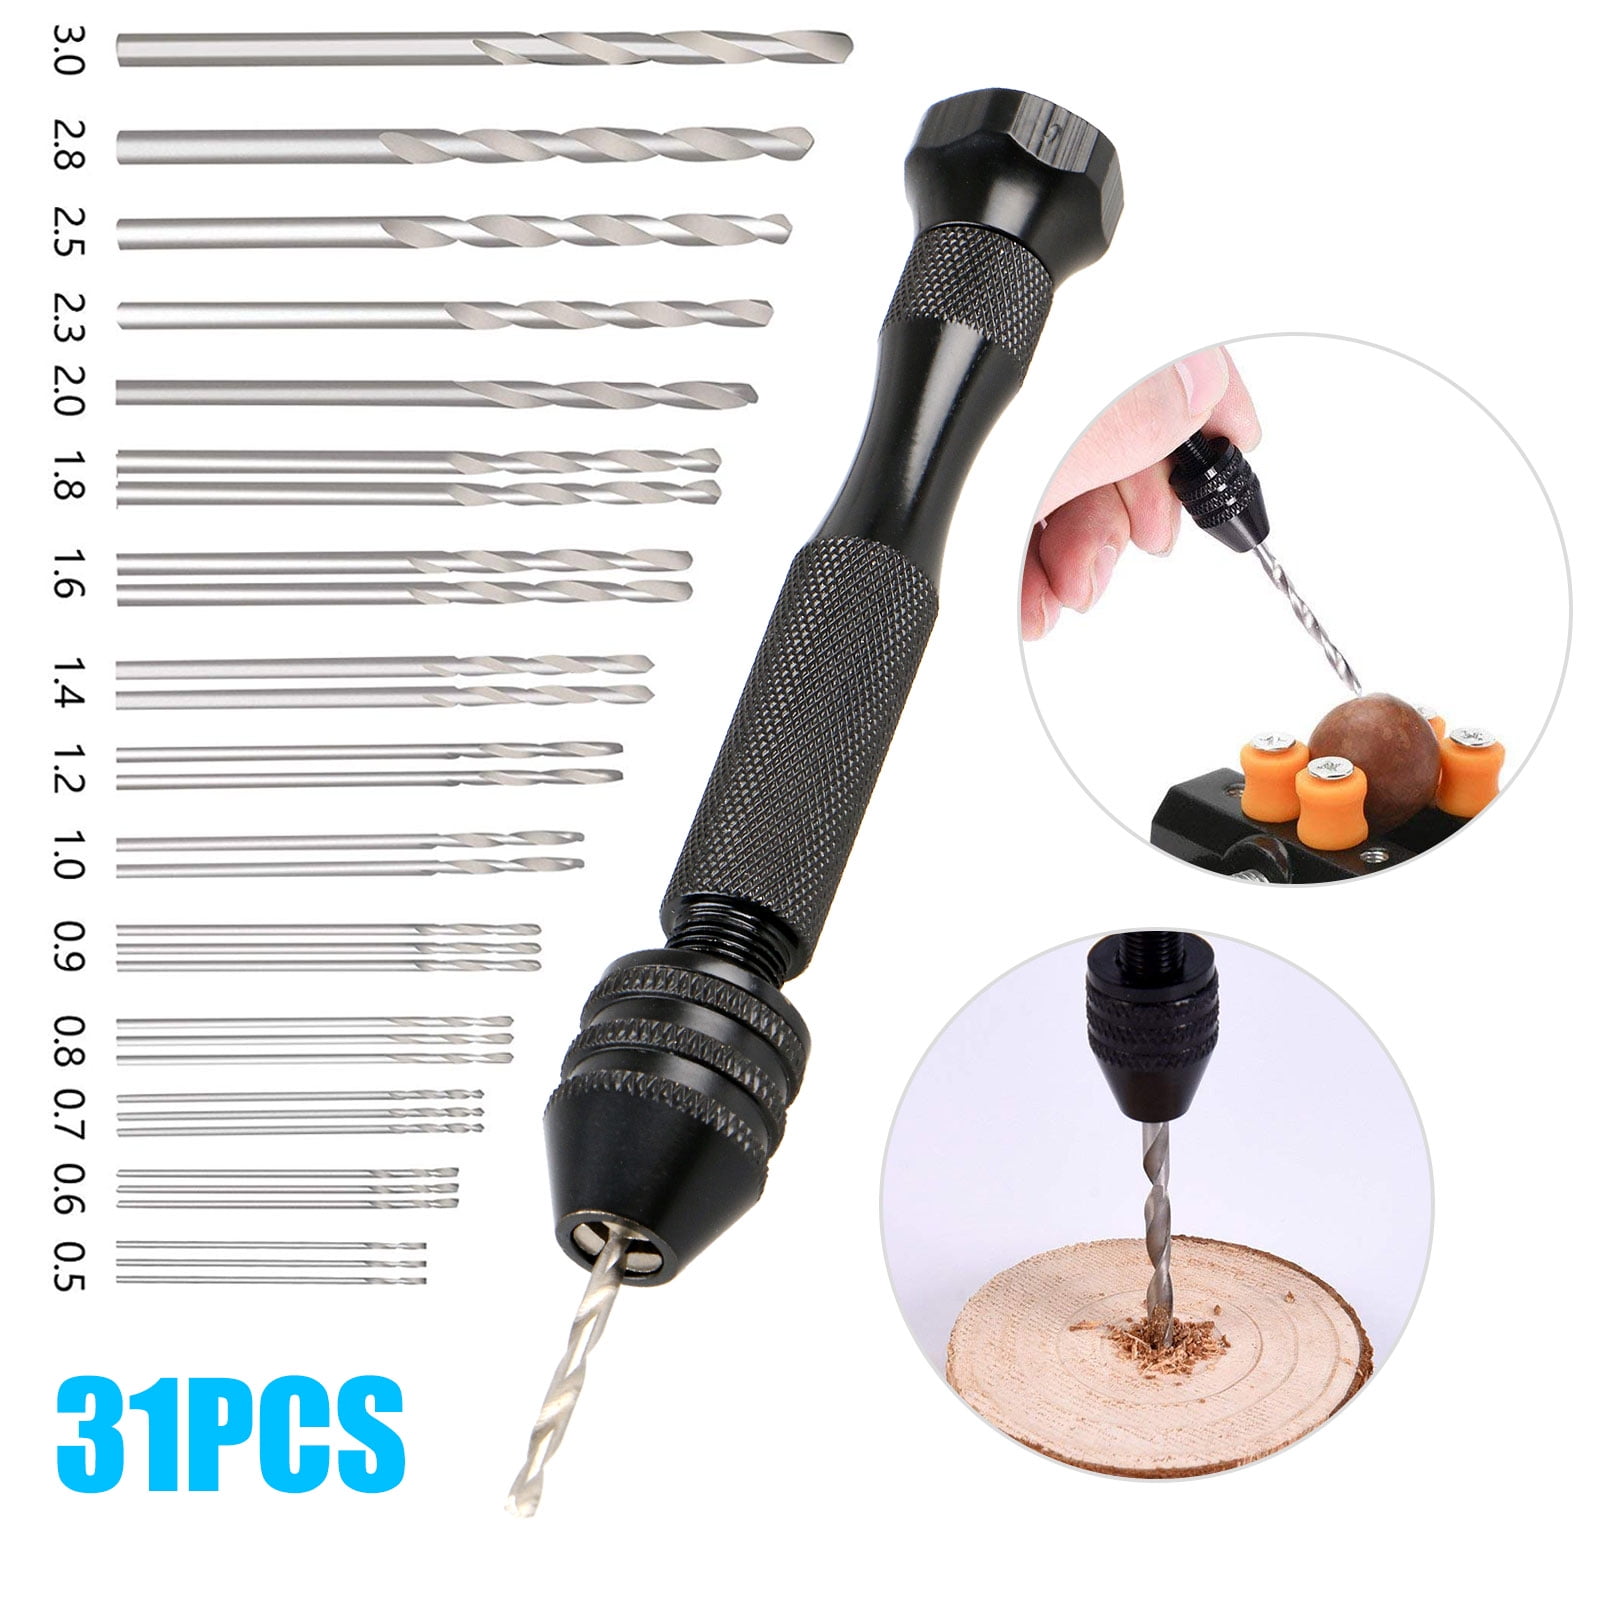 Twist Drills Micro Twist Drills Set with Precision Hand Drill Rotary Tool Plastic Craft DIY Drilling Tool 0.8-3.0mm Pin Vise Hand Drill Bit Set Drill Holders and Bench Vice for Wood Jewelry 